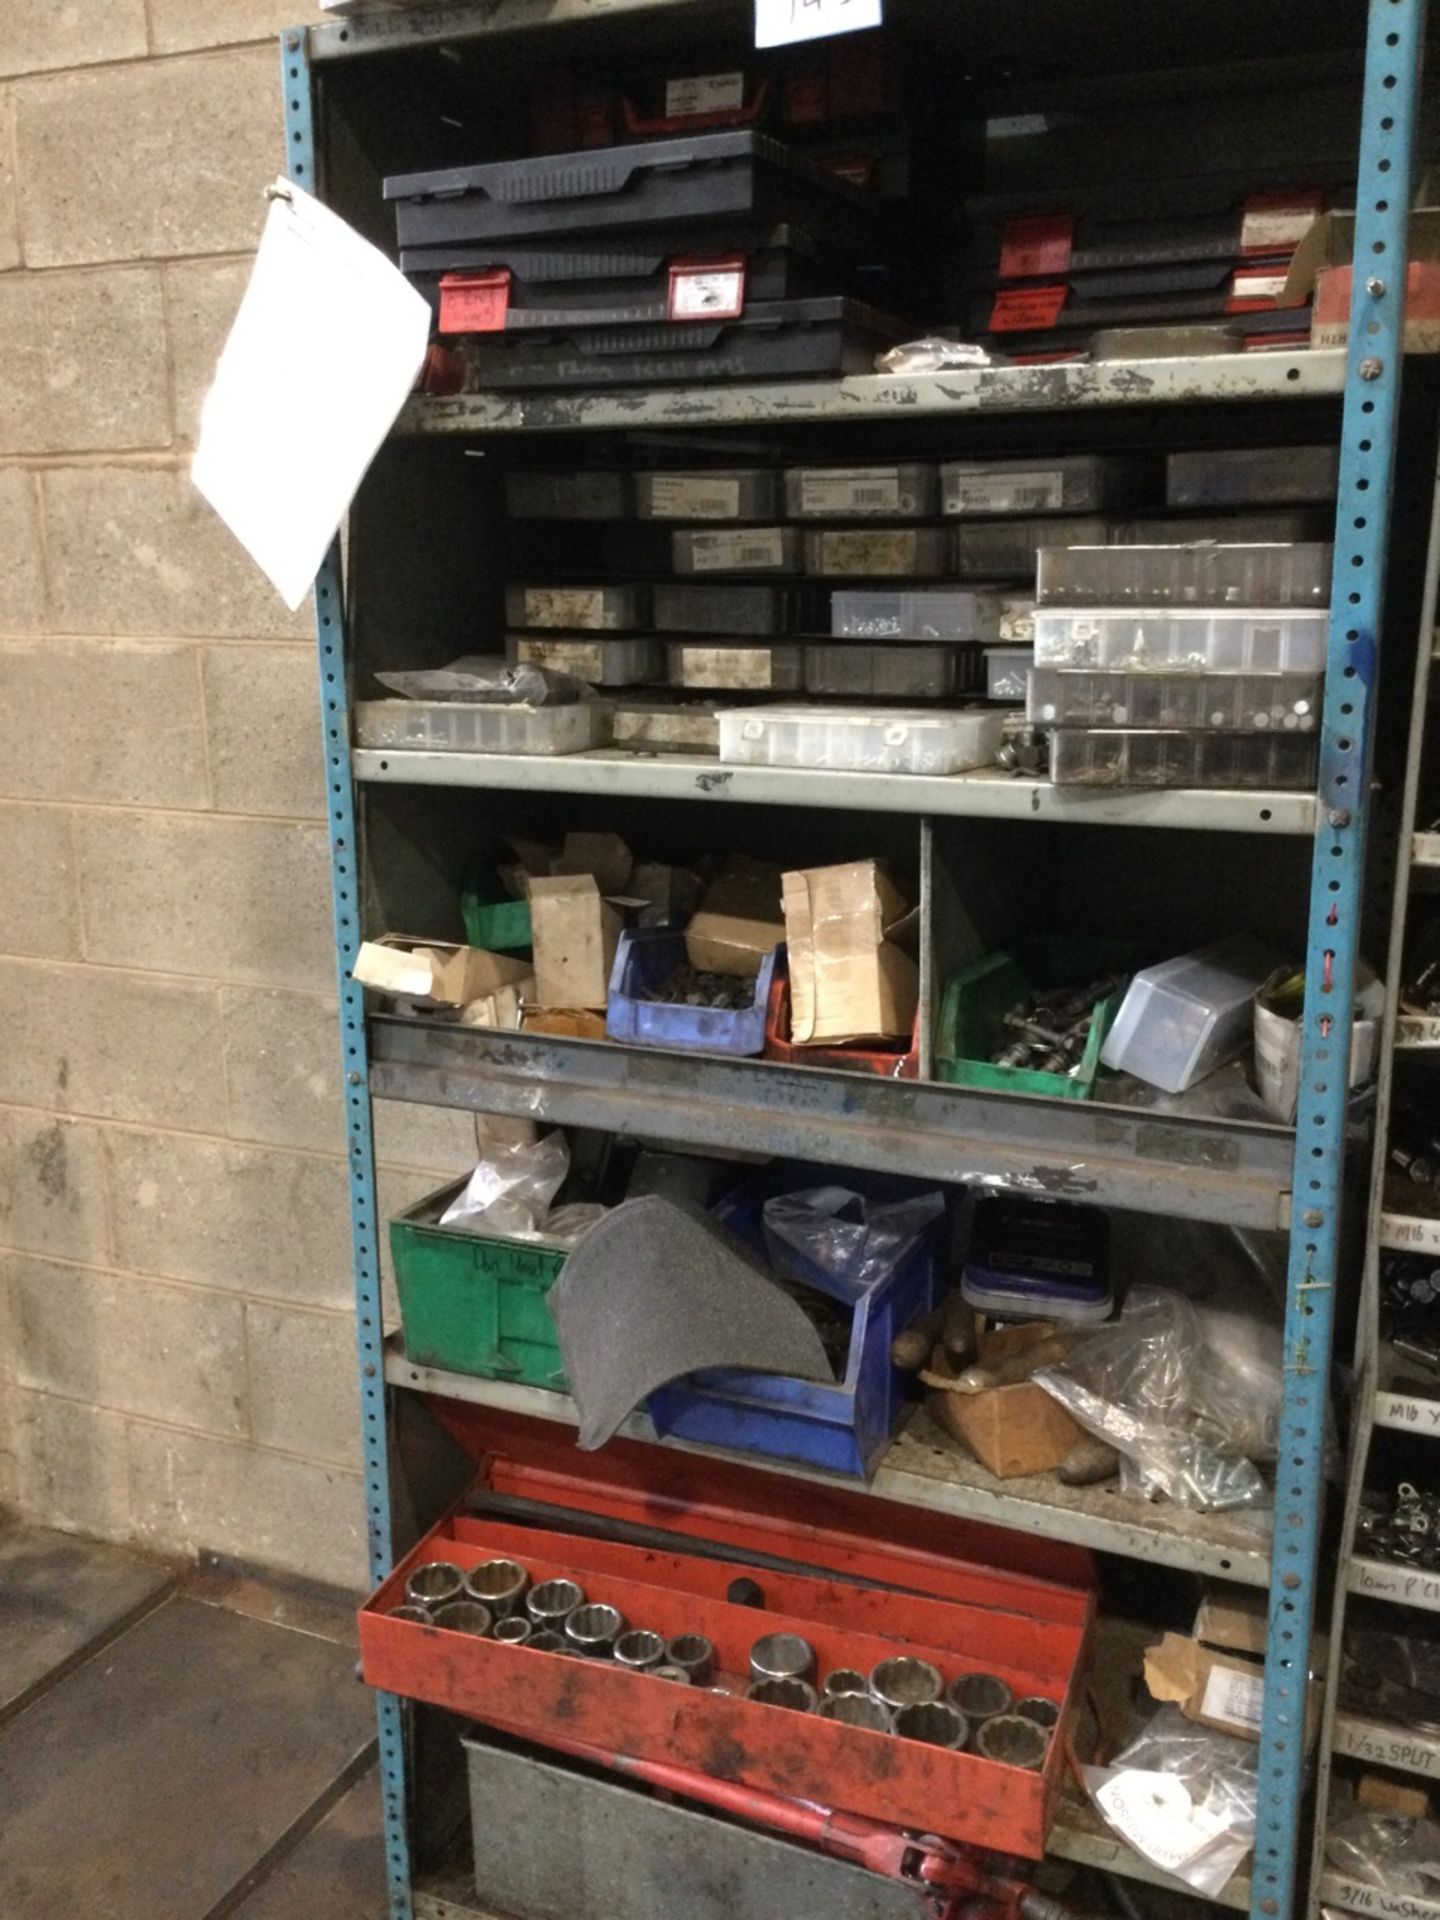 Contents Of Shelf Section To Include 3/4” Drive Sockets, Pump, Nuts, Bolts And Washers